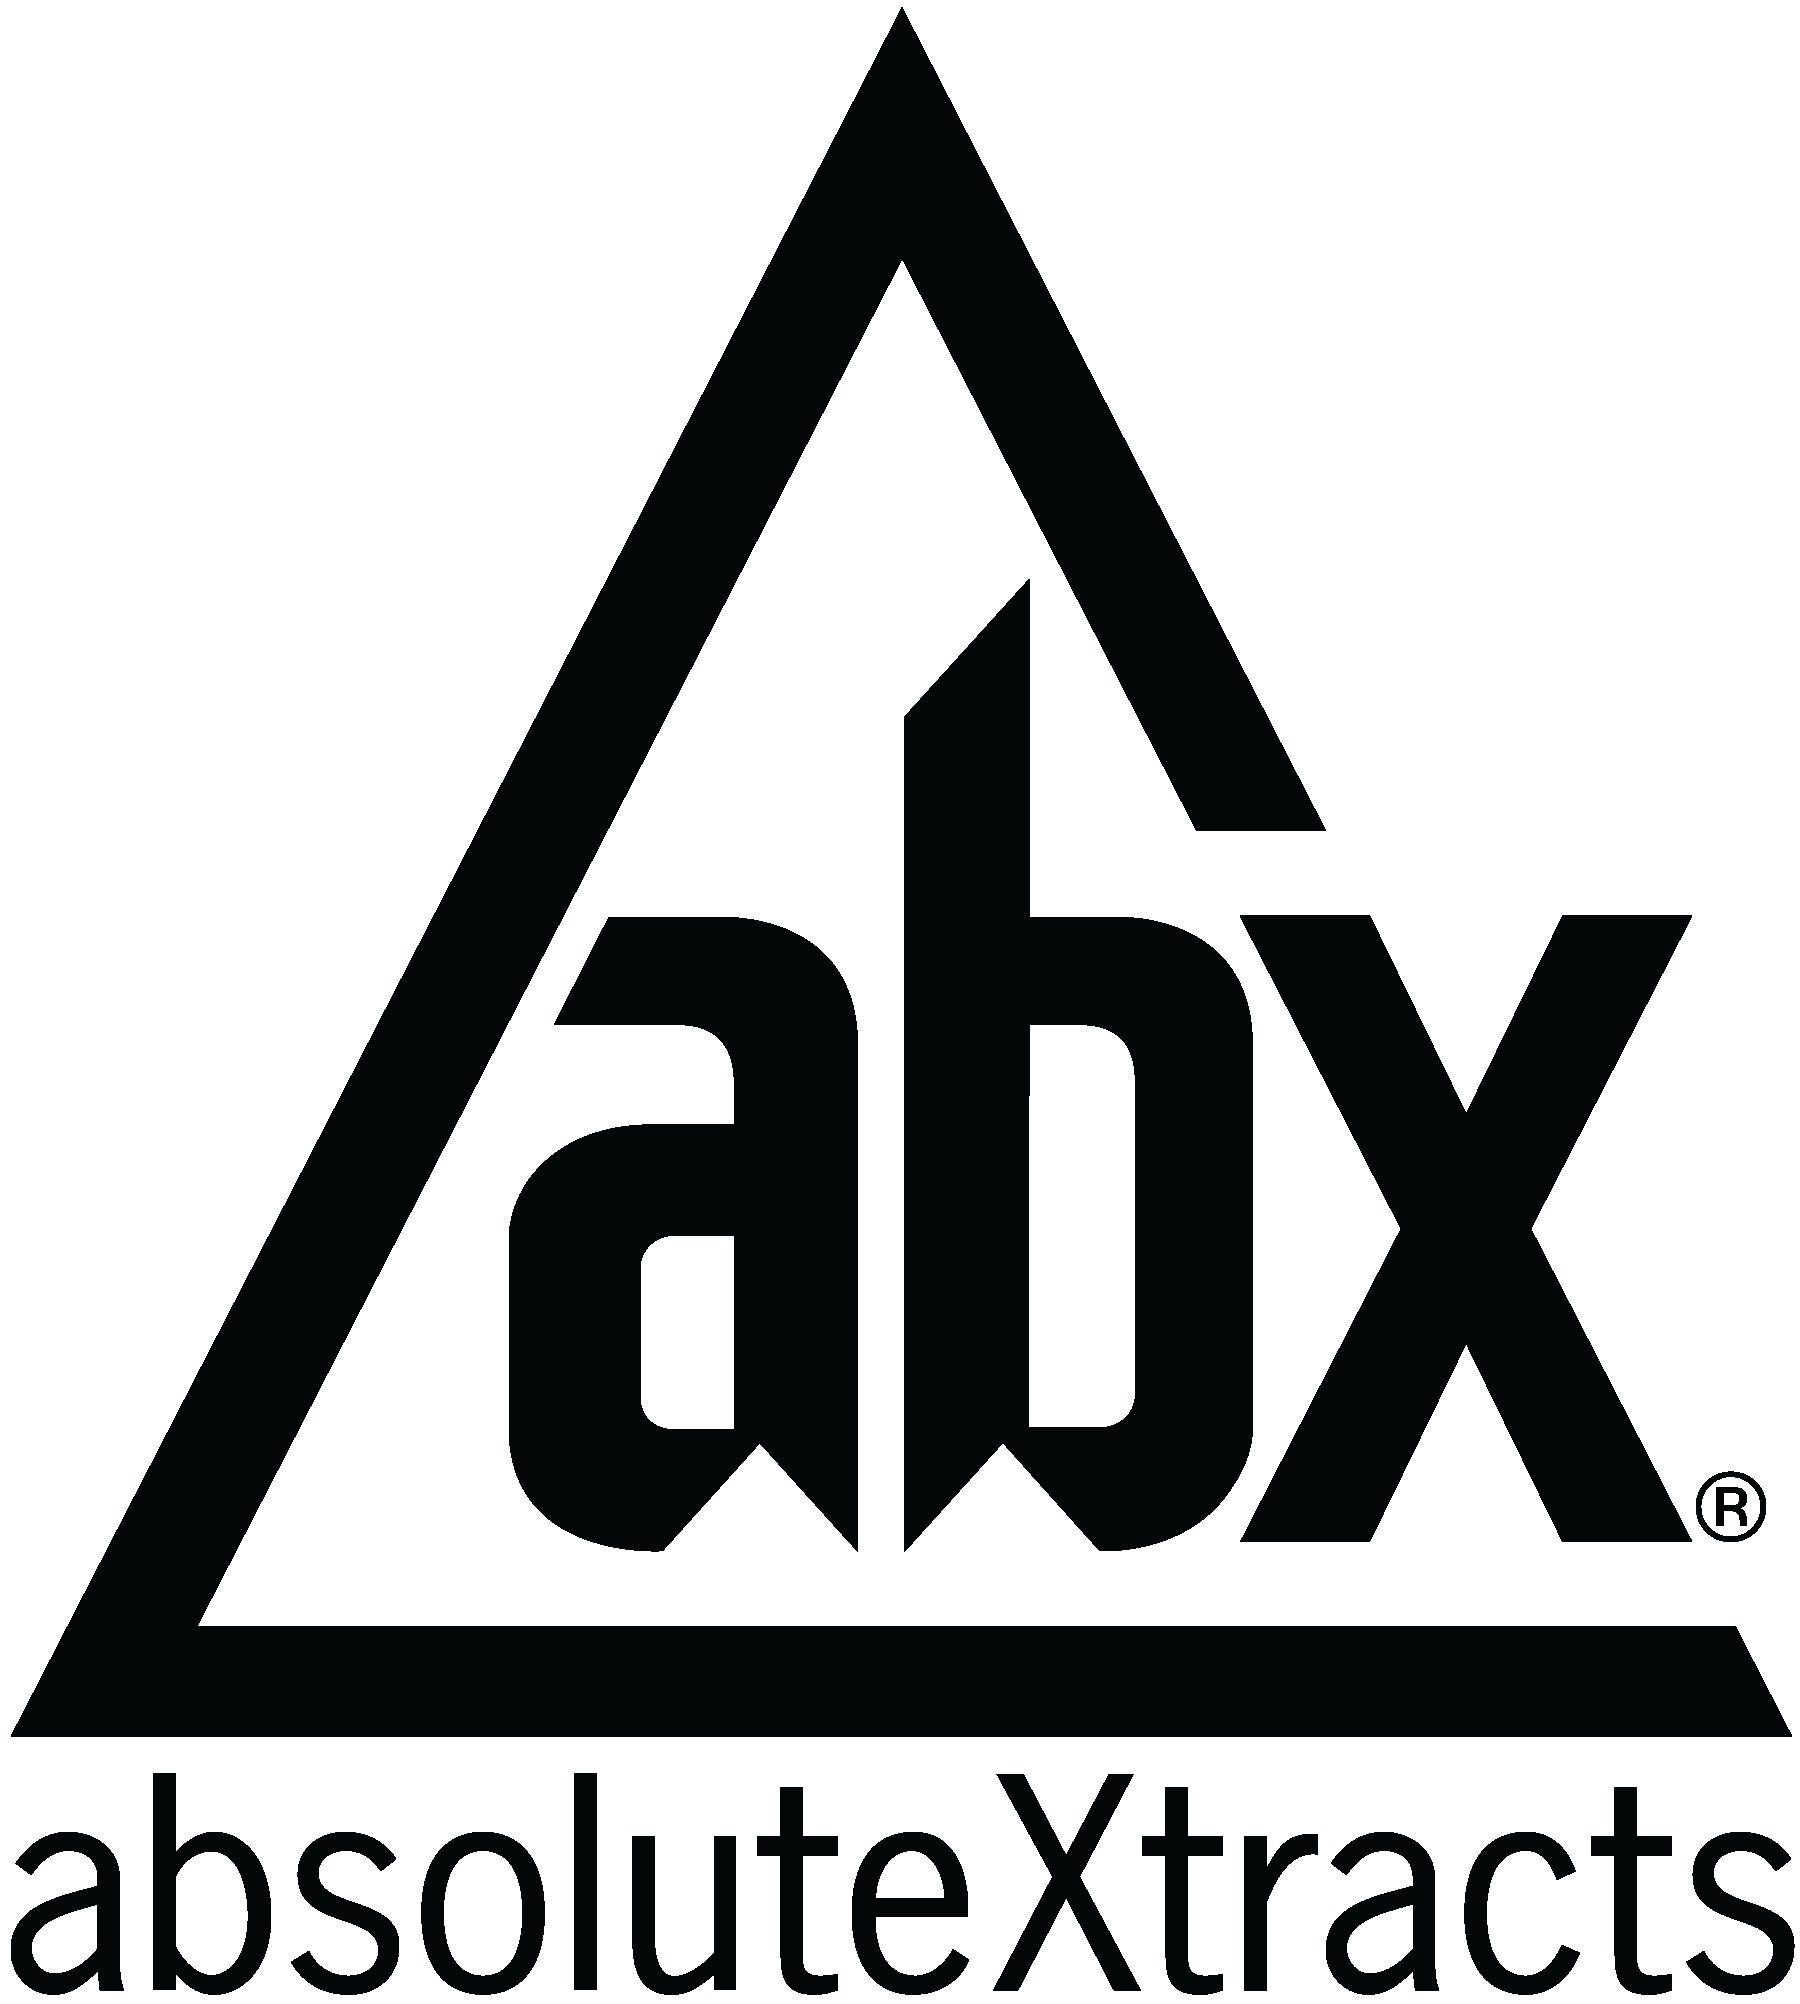 Absolute Xtracts (ABX)